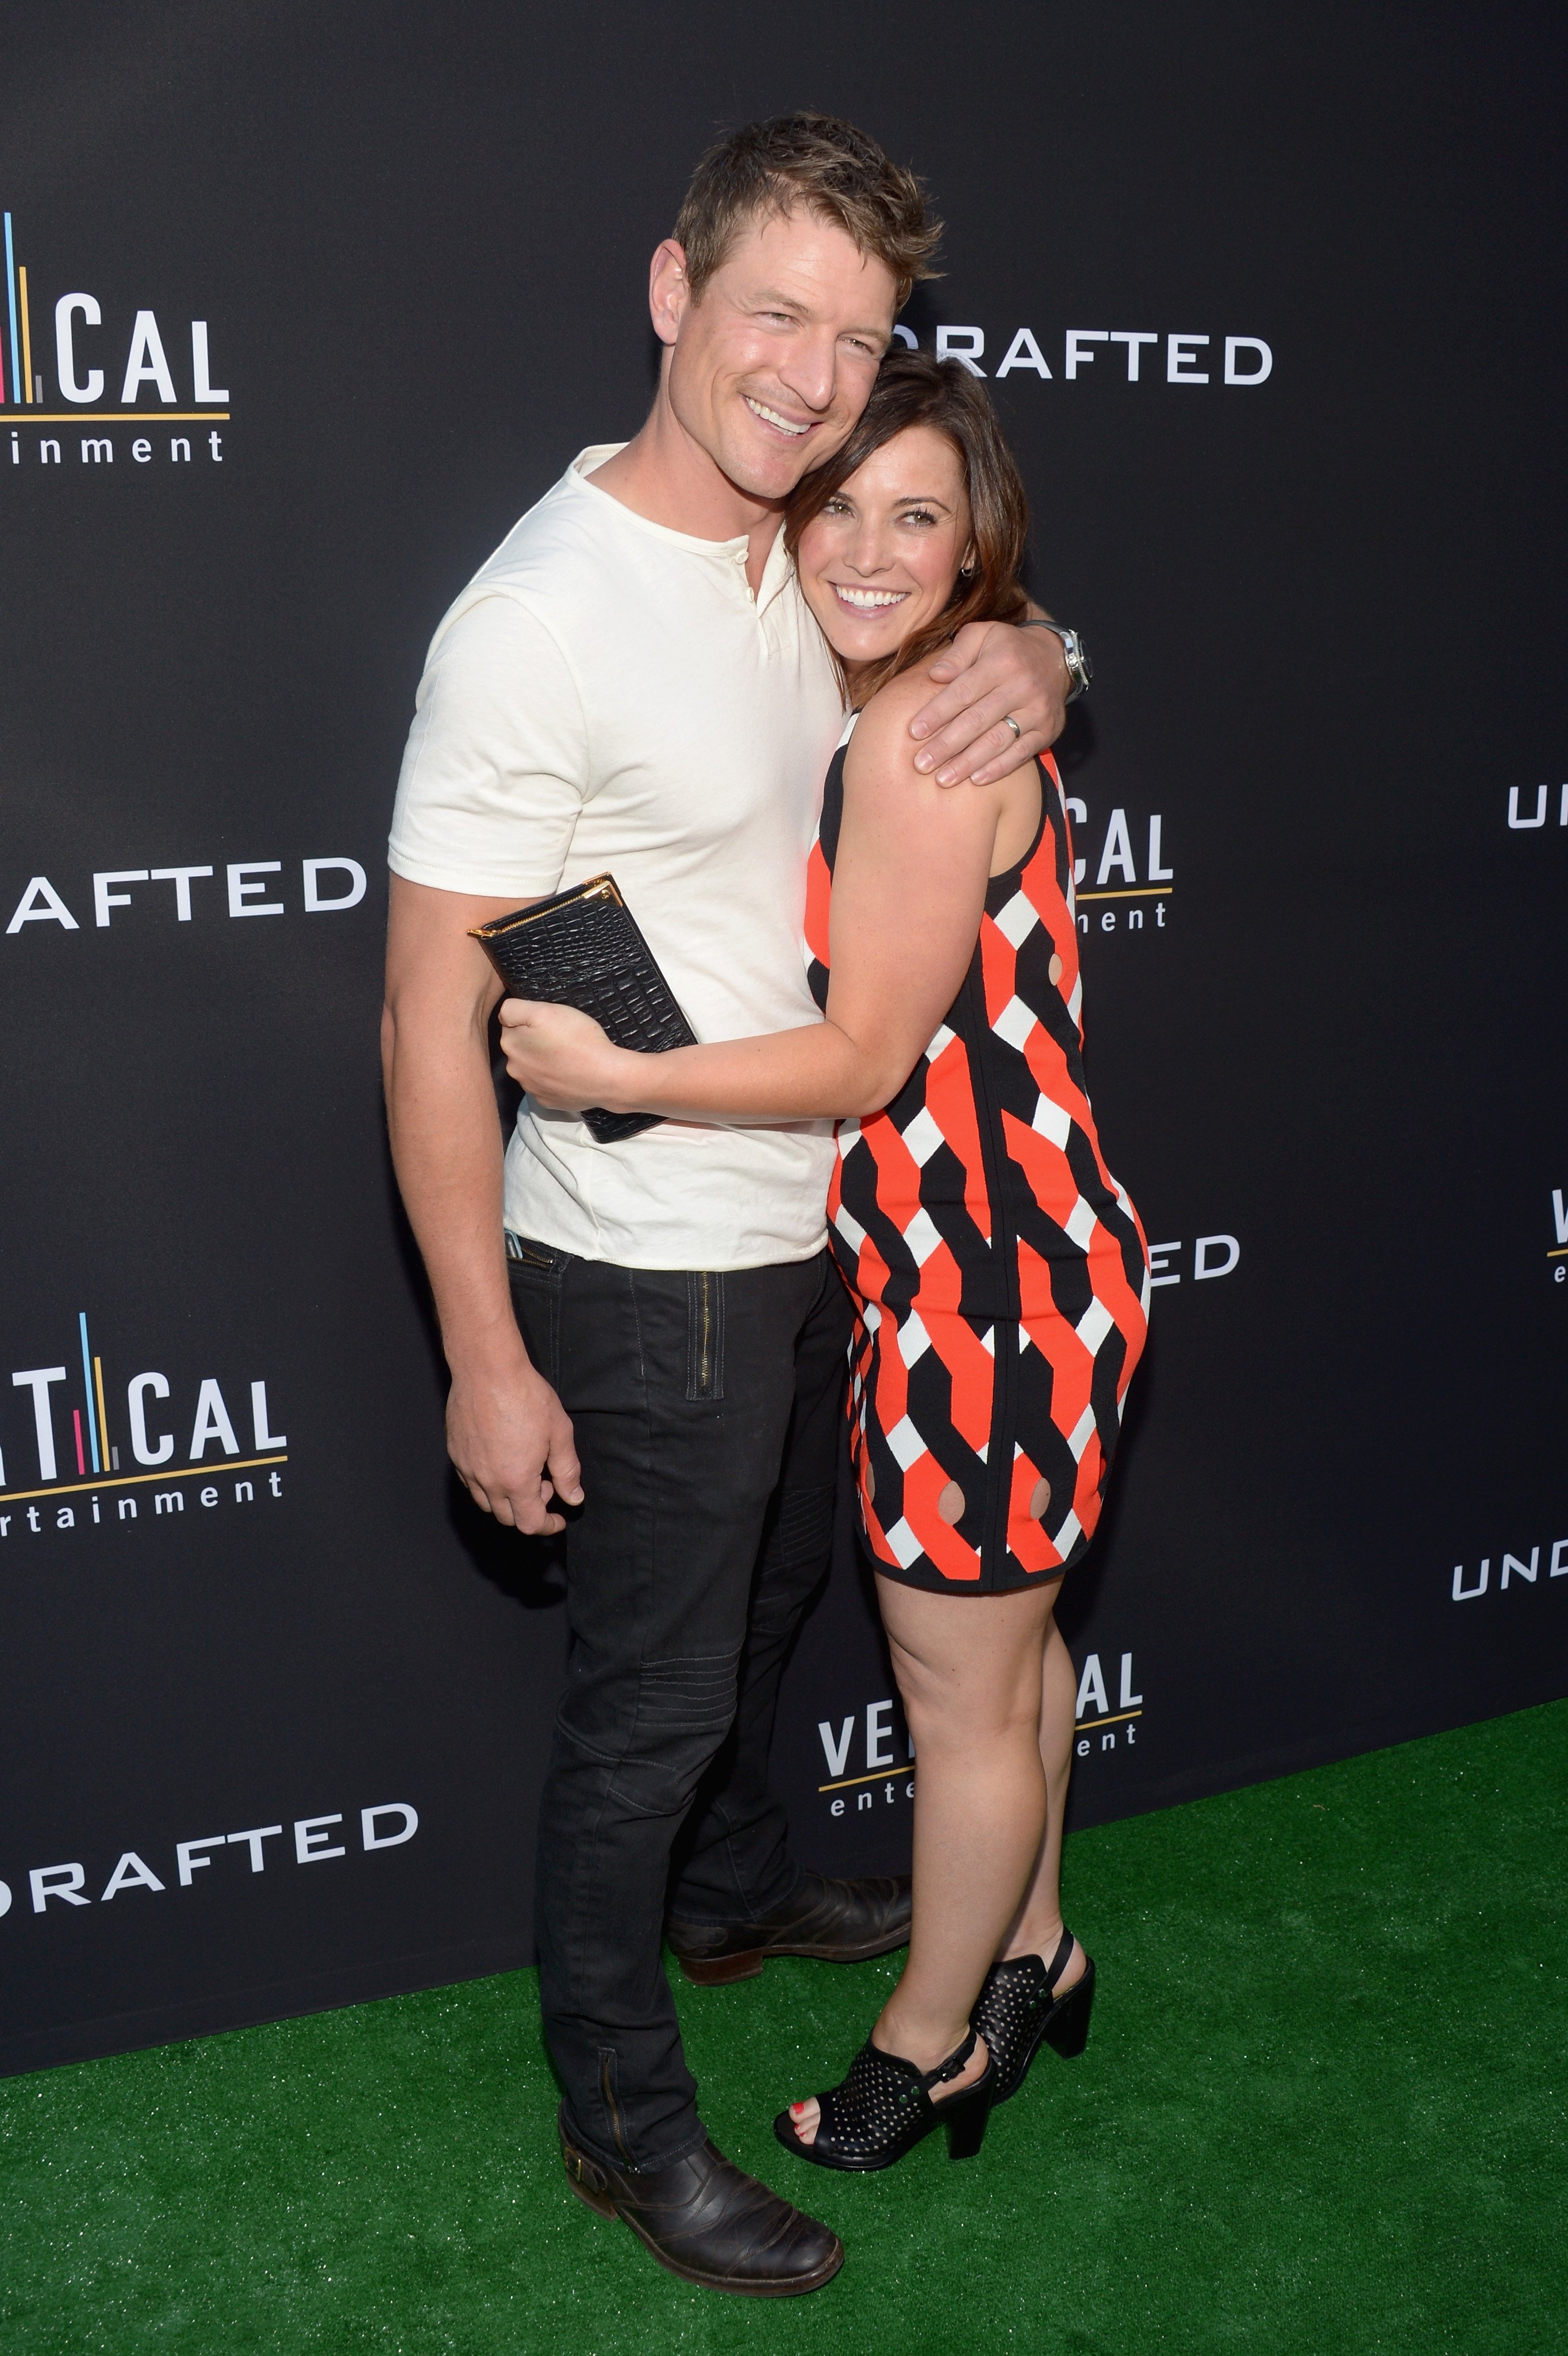  Philip Winchester and Megan Coughlin attend the premiere of Vertical Entertainment's "Undrafted" at ArcLight Hollywood on July 11, 2016. | Photo: GettyImages